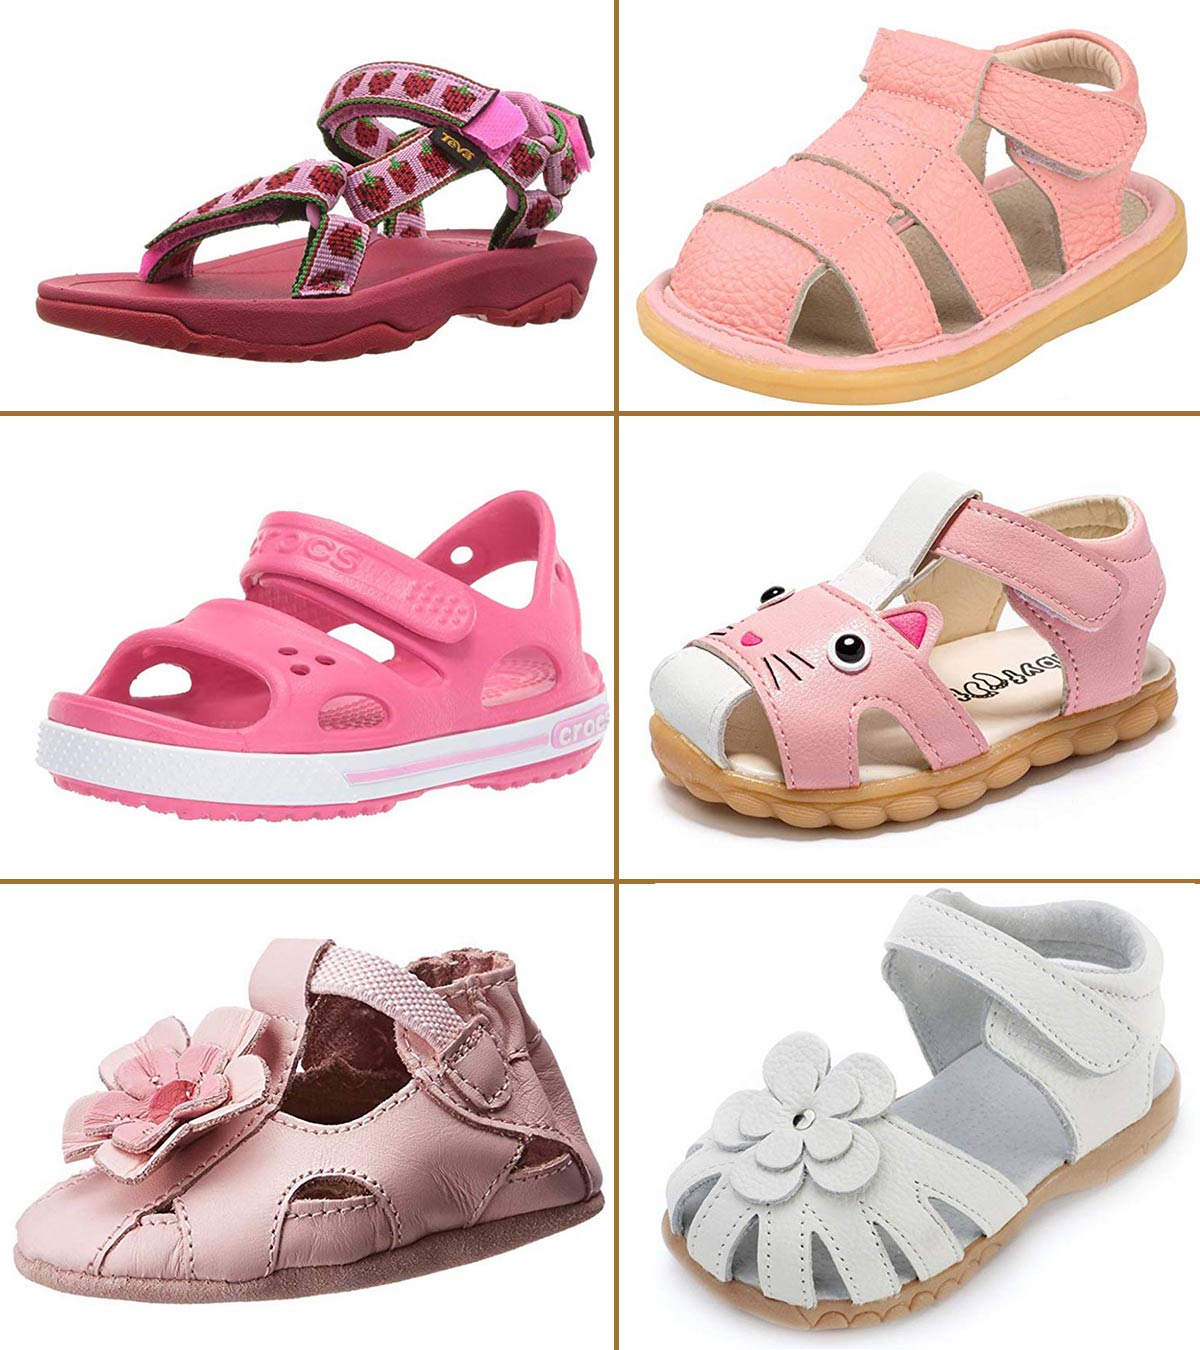 Kiheisg children High quality fashion korean flat sandals for kids girl 3  to 4 to 5 to 6 to 7 to 8 to 9 to 10 to 11 to 12 to 13